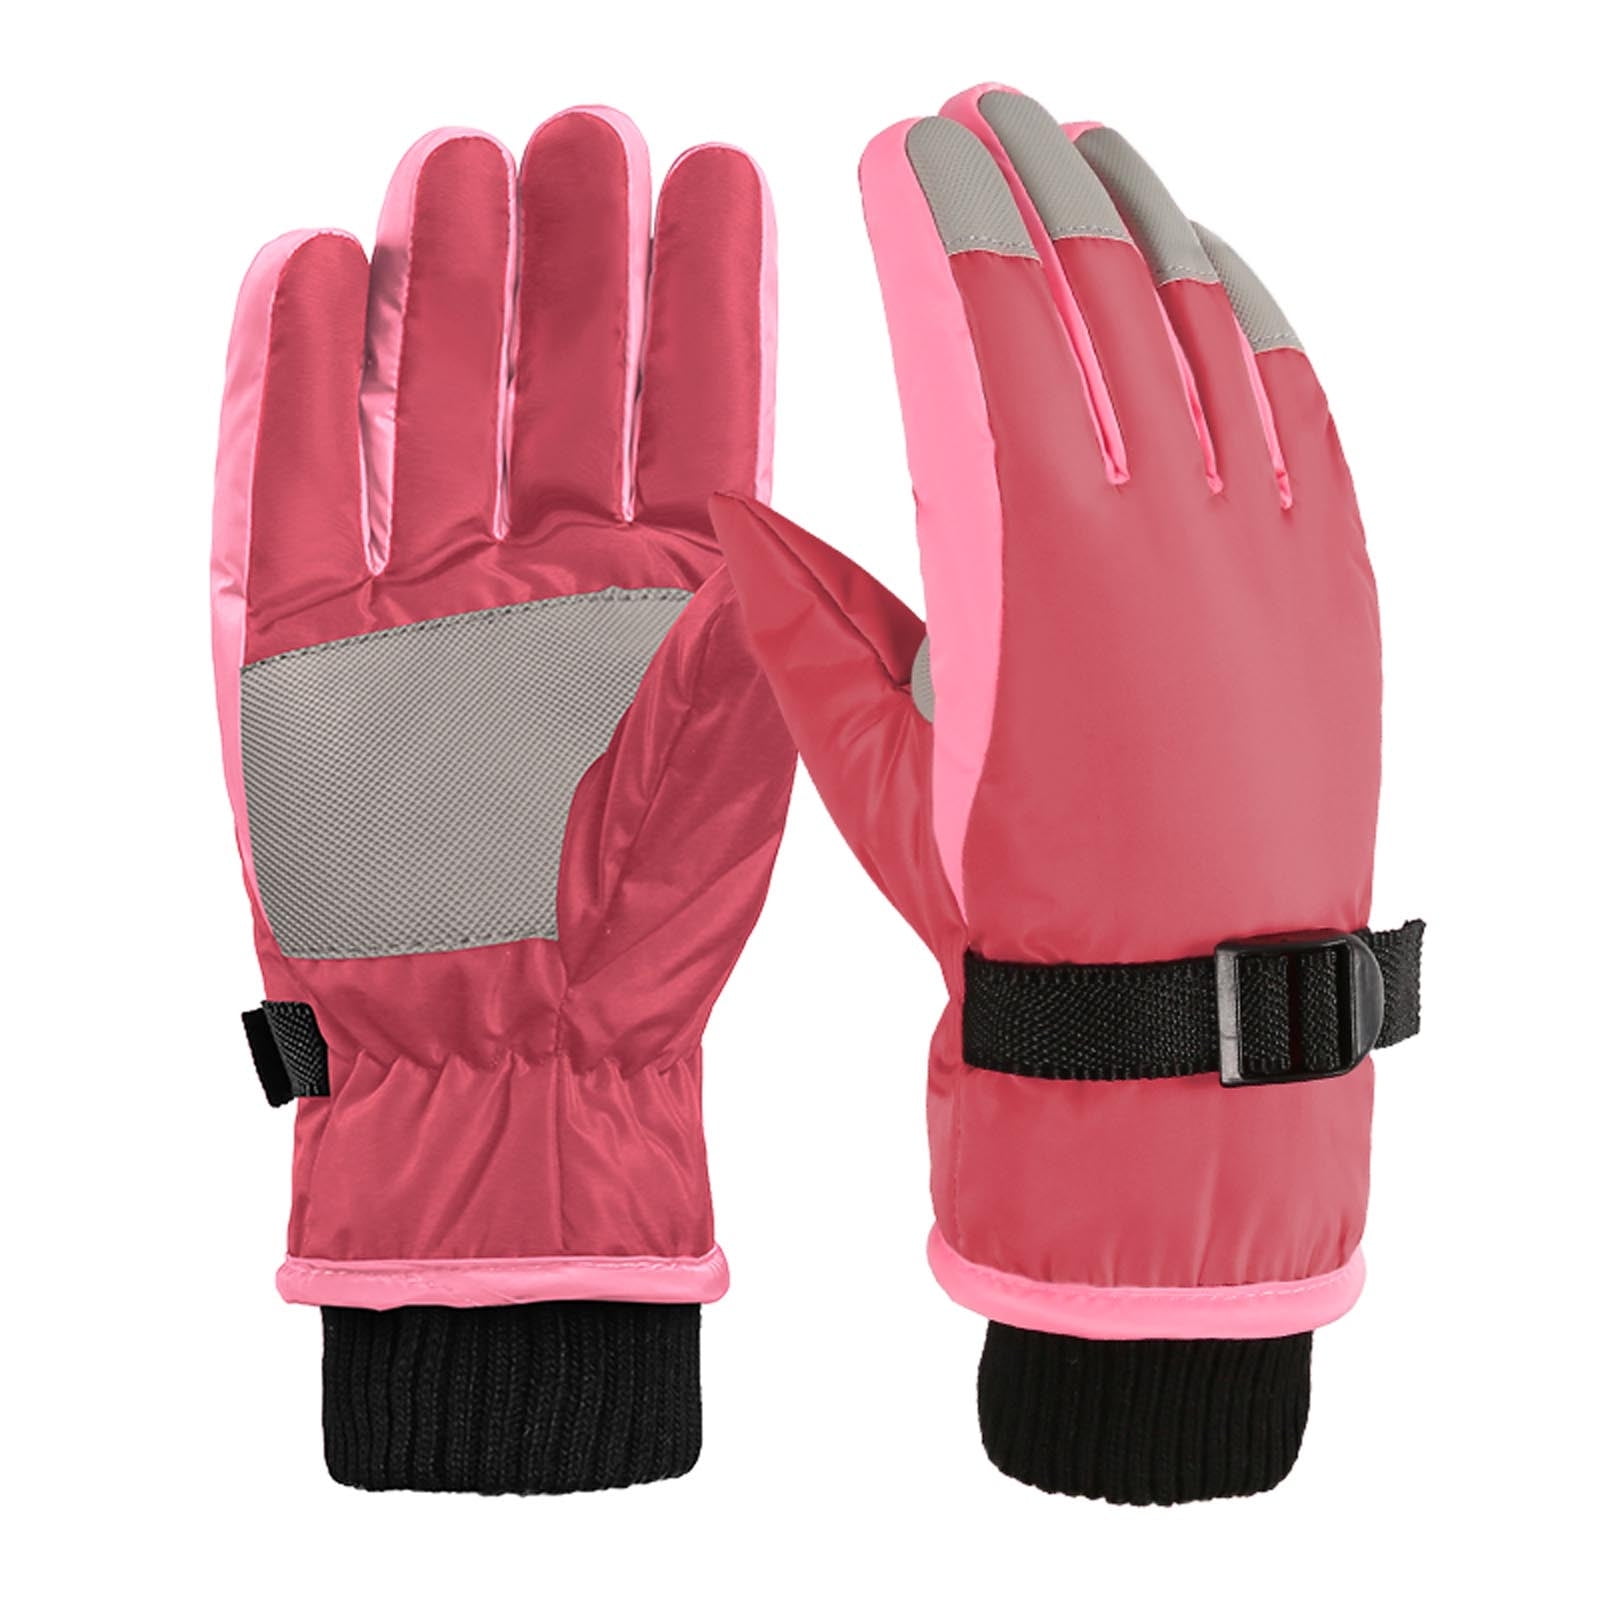 Kids Ski Gloves Winter Warm Lining Snow Cold Weather Windproof Waterproof Adjustable Gloves for Boys & Girls 2-5Years 